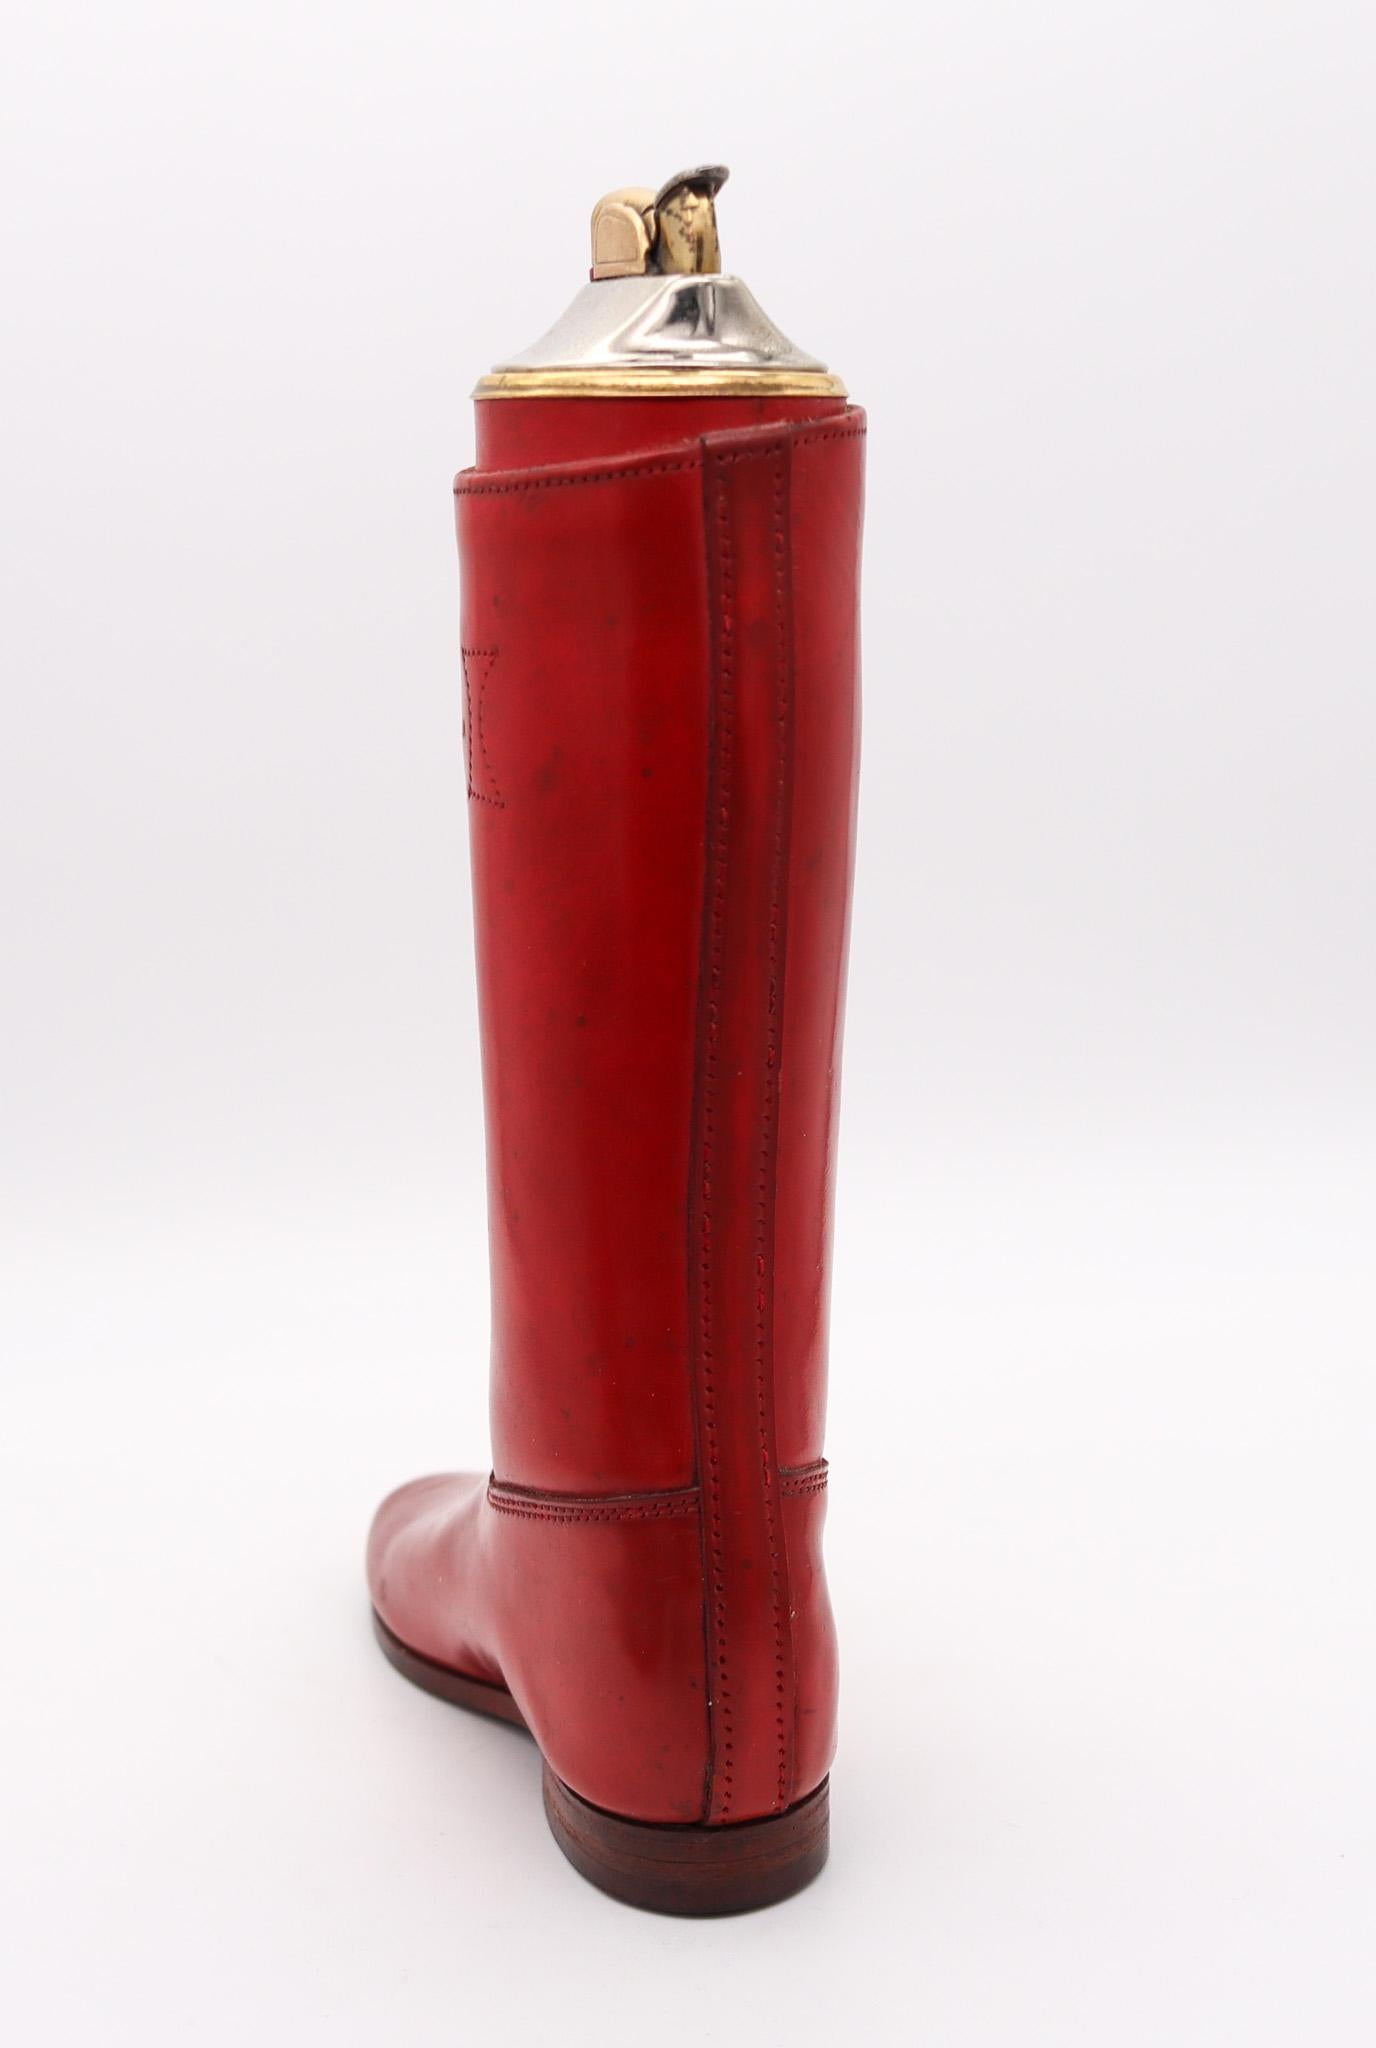 Nord-américain EVANS 1952 For Loyal Automatic Table Lighter in the Shape Of Large Leather Boot en vente